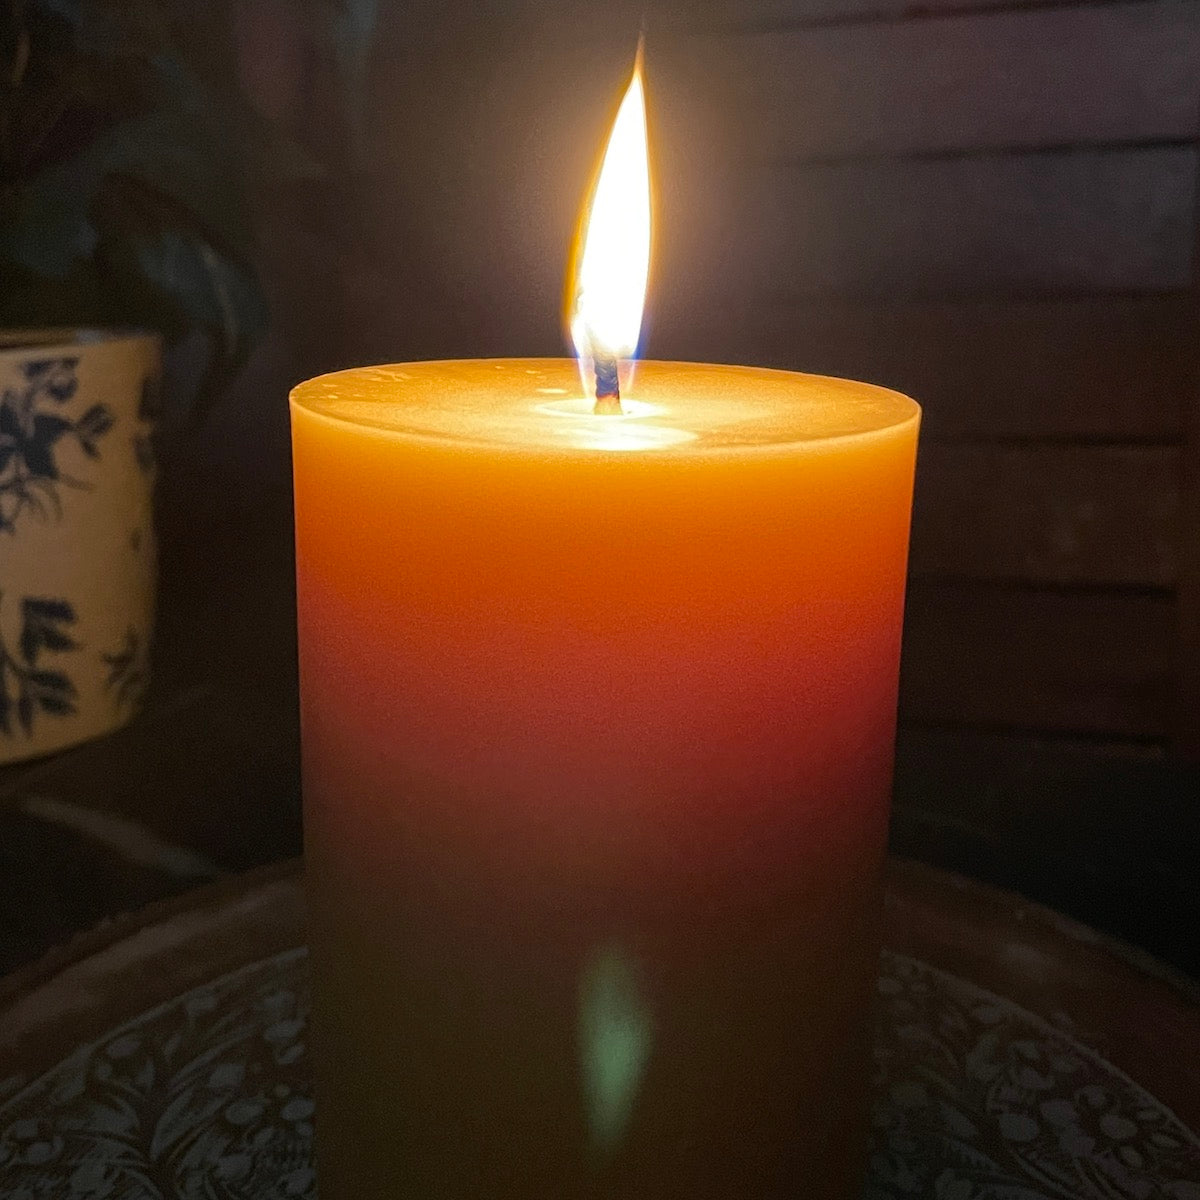 Blessed 3 Day Candle 100% Beeswax, LIMITED TO 5 PER ORDER